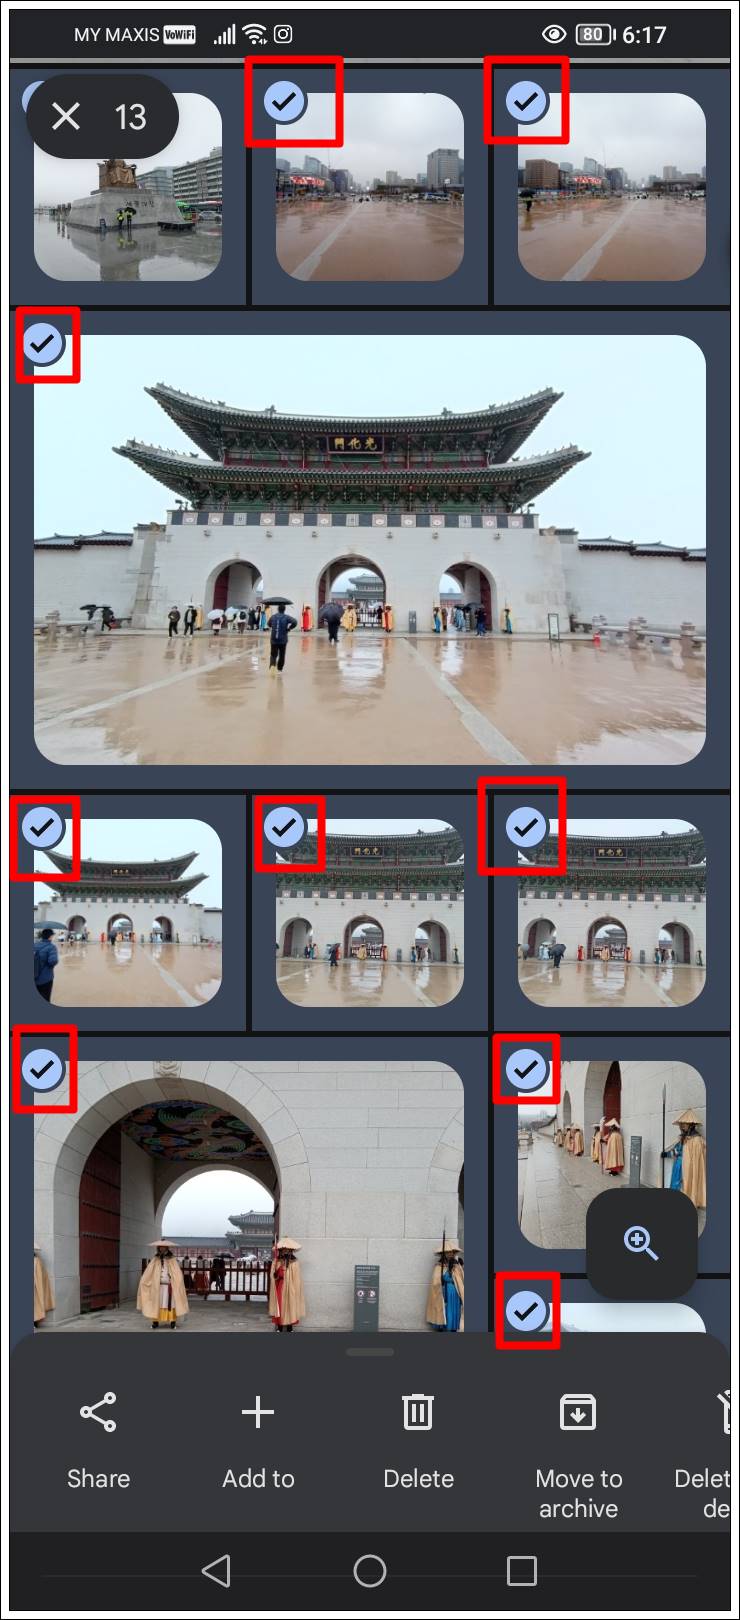 This is a screenshot of Google Photos on a mobile device. It demonstrates how additional photos can be selected by not lifting your finger after selecting the first one and dragging down to include those photos in the selection.